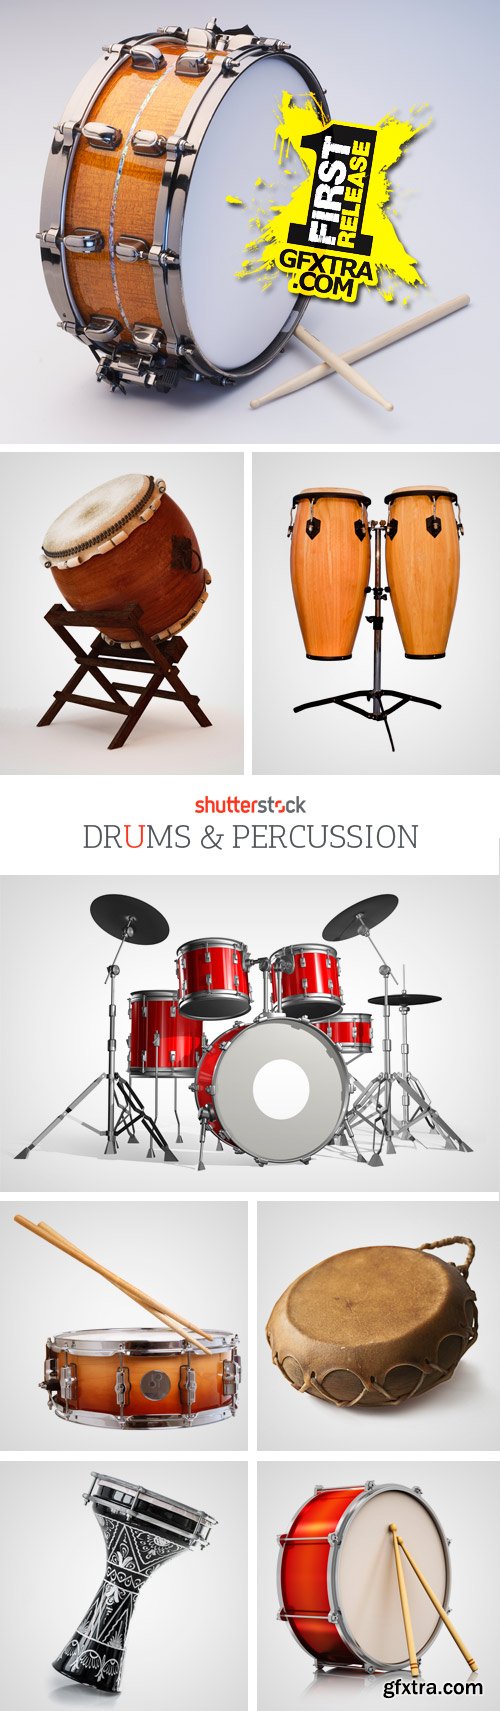 Amazing SS - Drums & Percussion, 25xJPGs